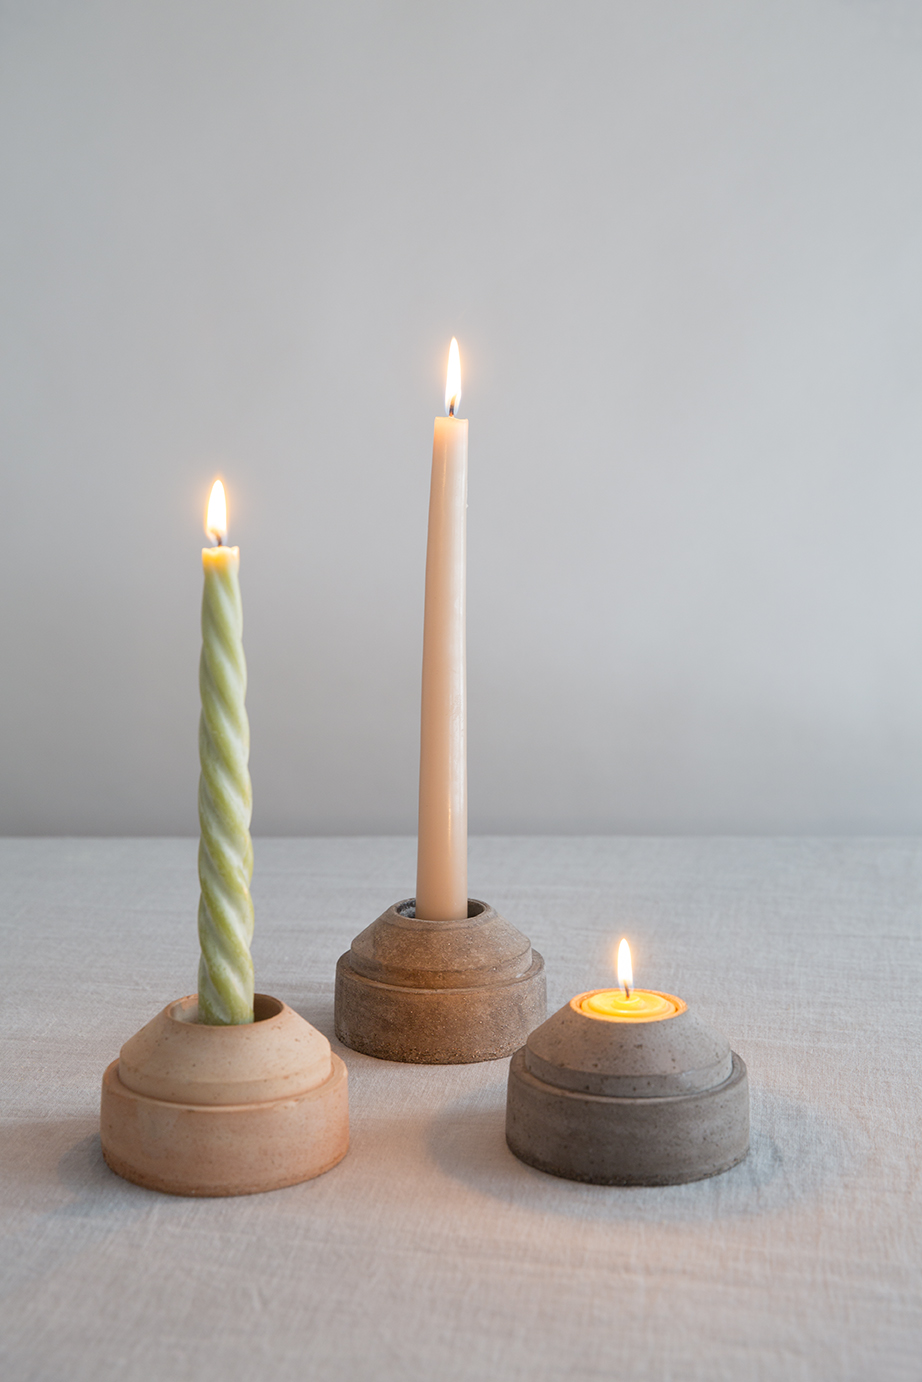 Three raw candleholders with candles.